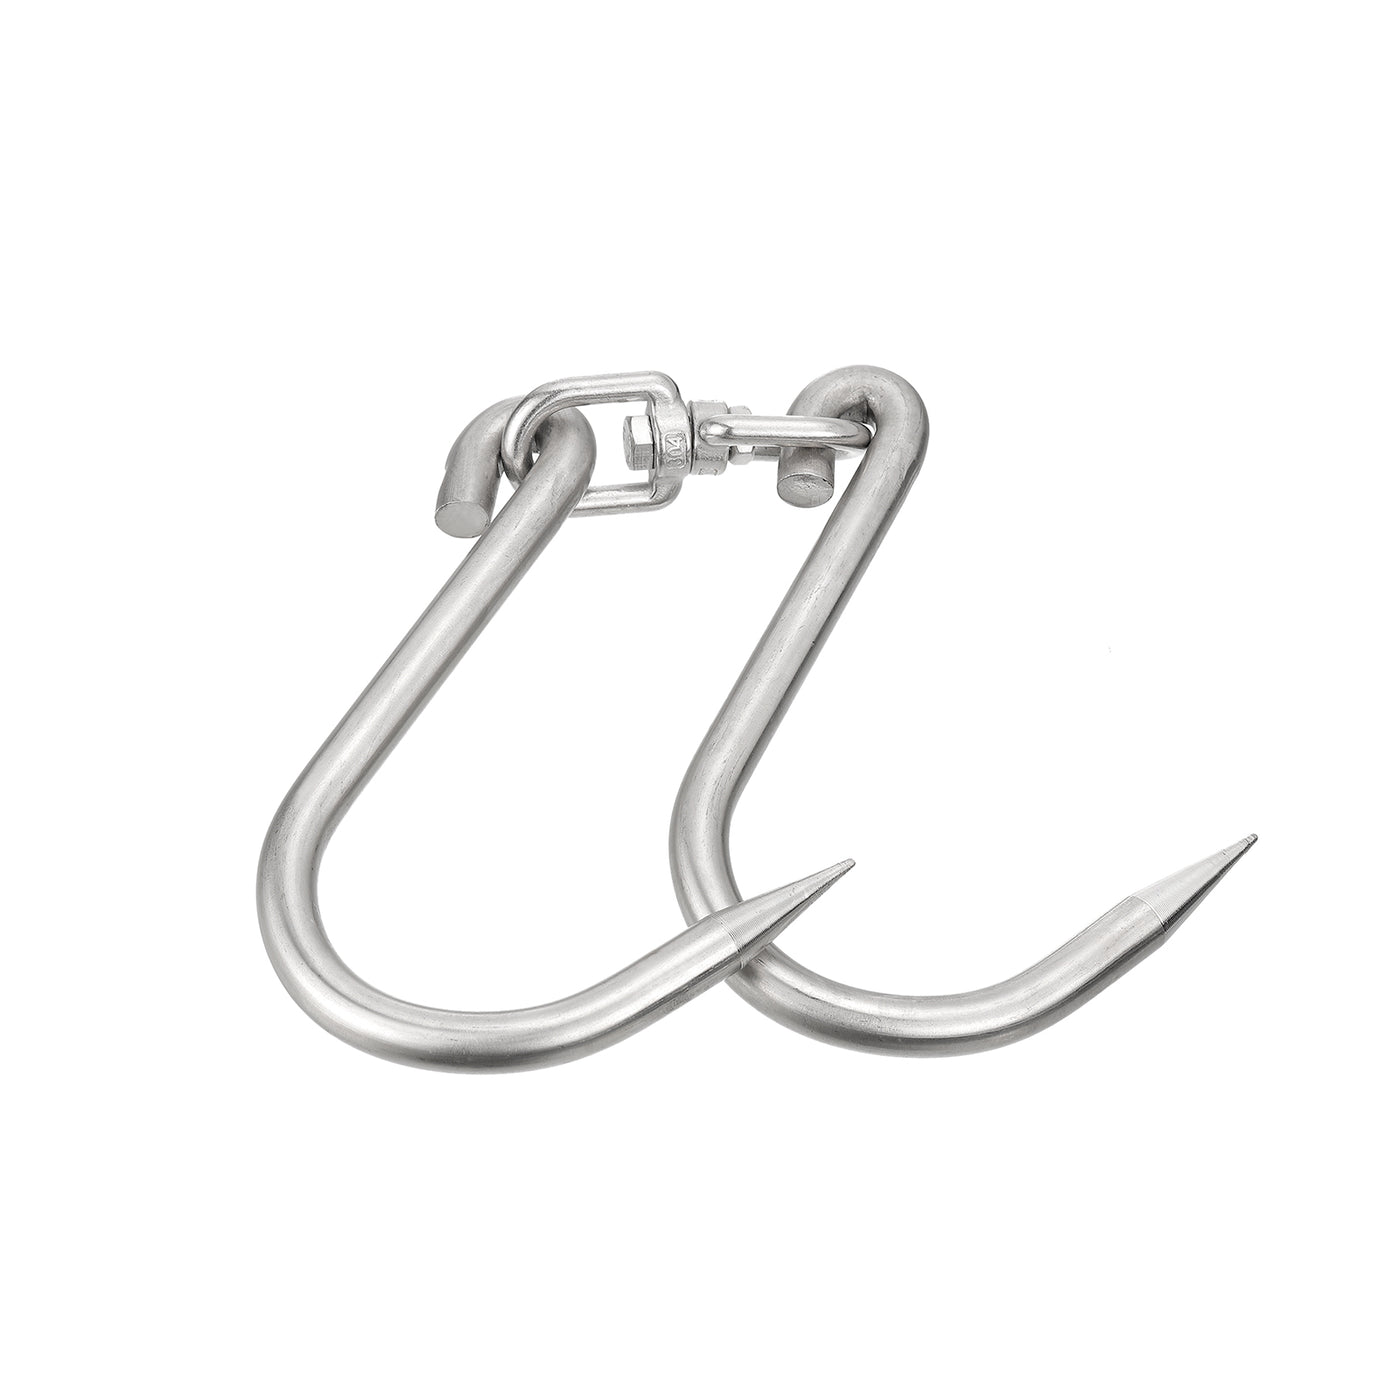 uxcell Uxcell Swivel Meat Hooks, Thickness Stainless Steel Processing Butcher Hooks for Hanging Drying Smoking Meat Products